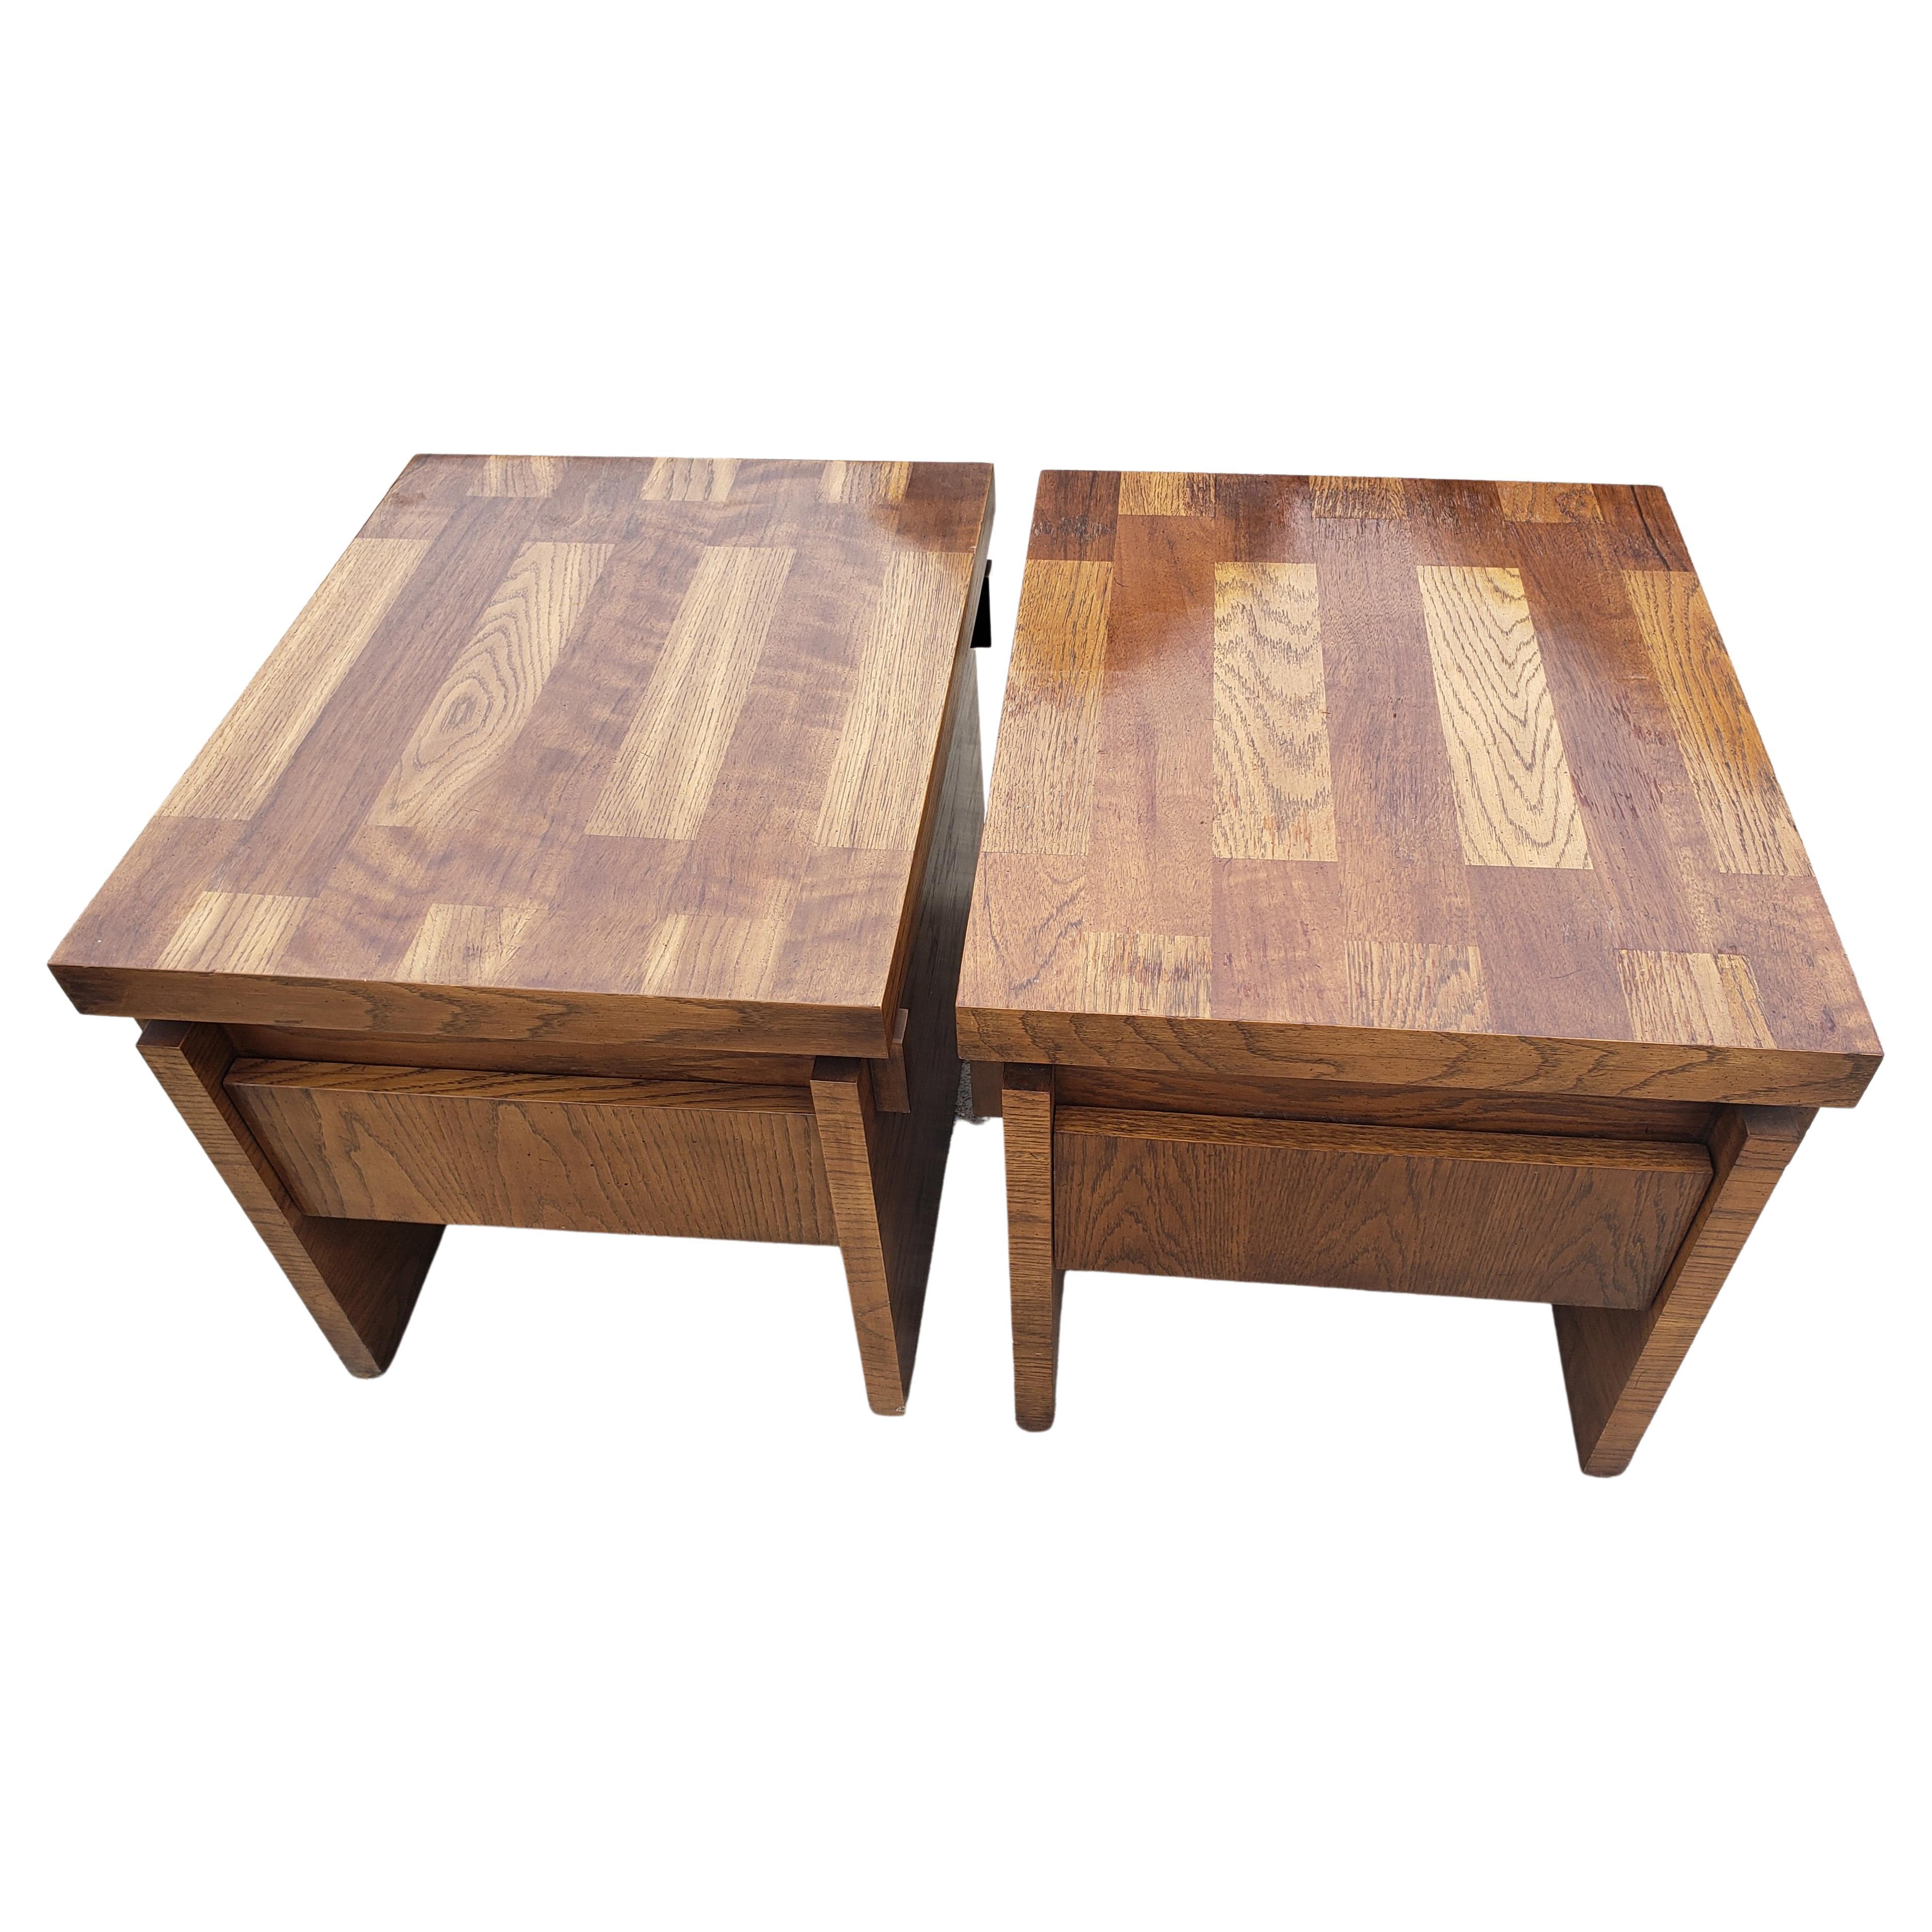 A pair of one drawer Brutalist chunky oak parquetry side tables. 
Very good vintage condition. 
Measure 22